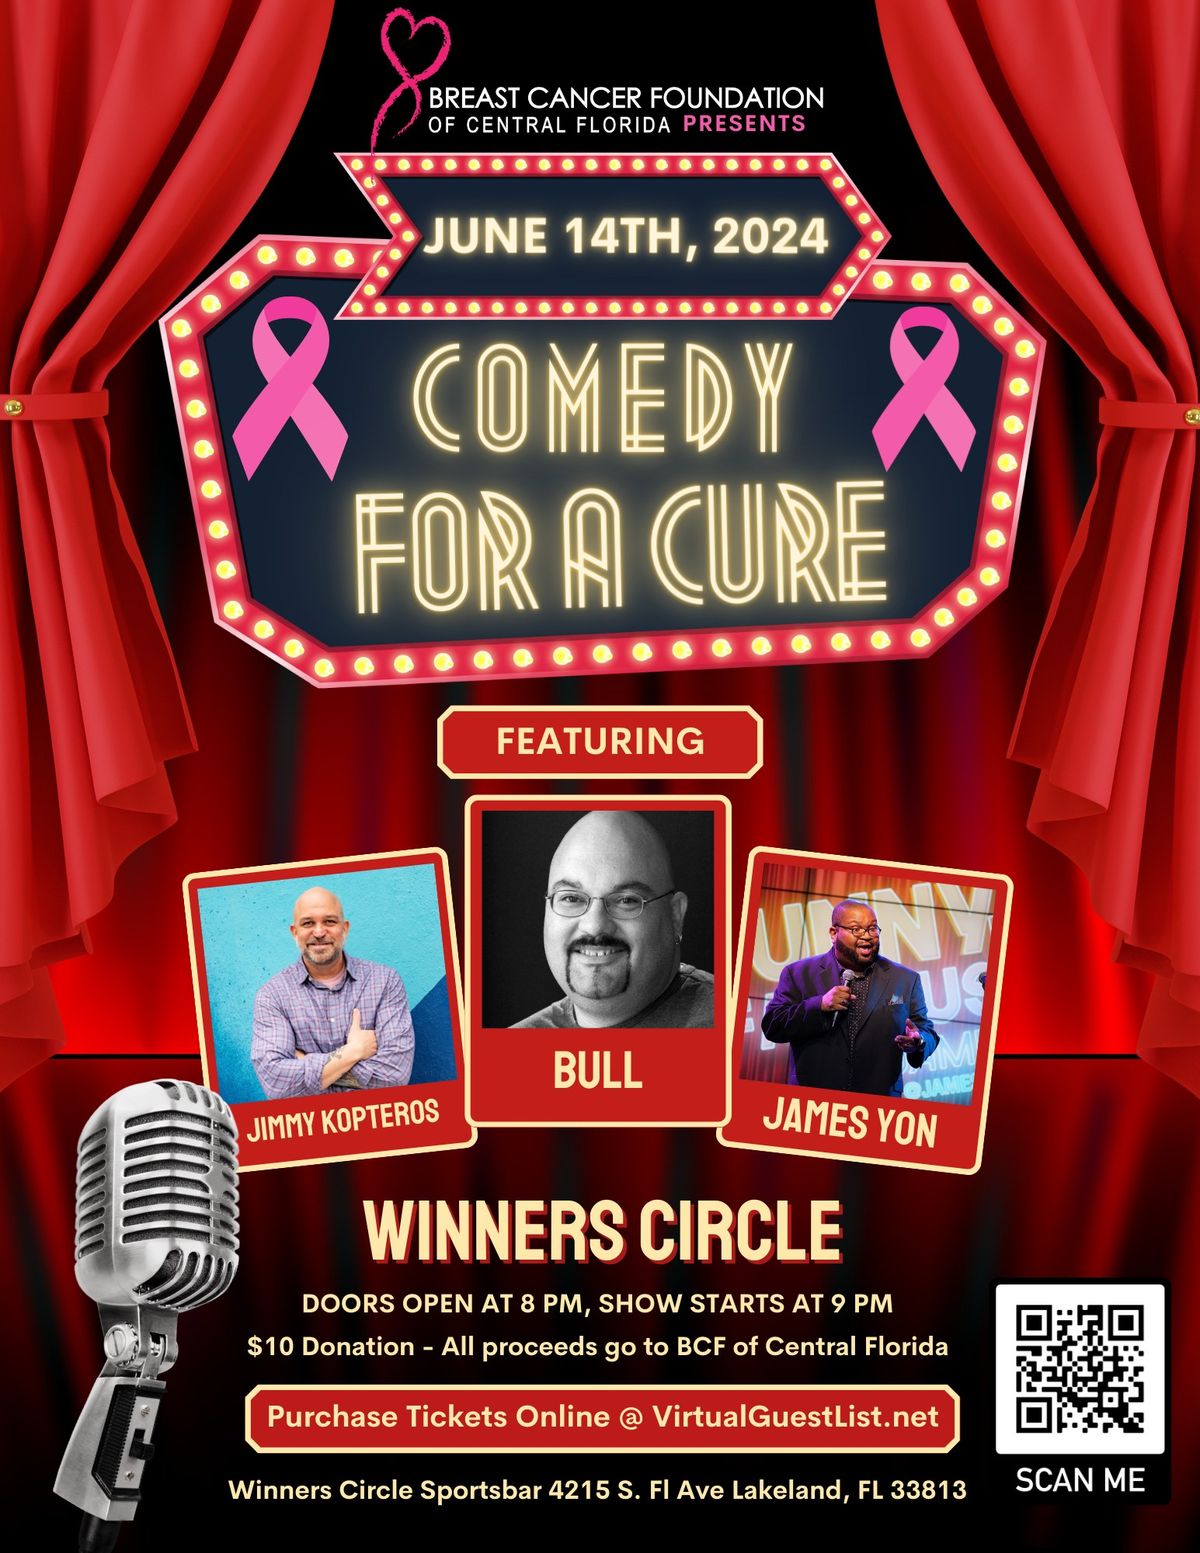 The Breast Cancer Foundation of Central Florida Presents: Comedy for a Cure